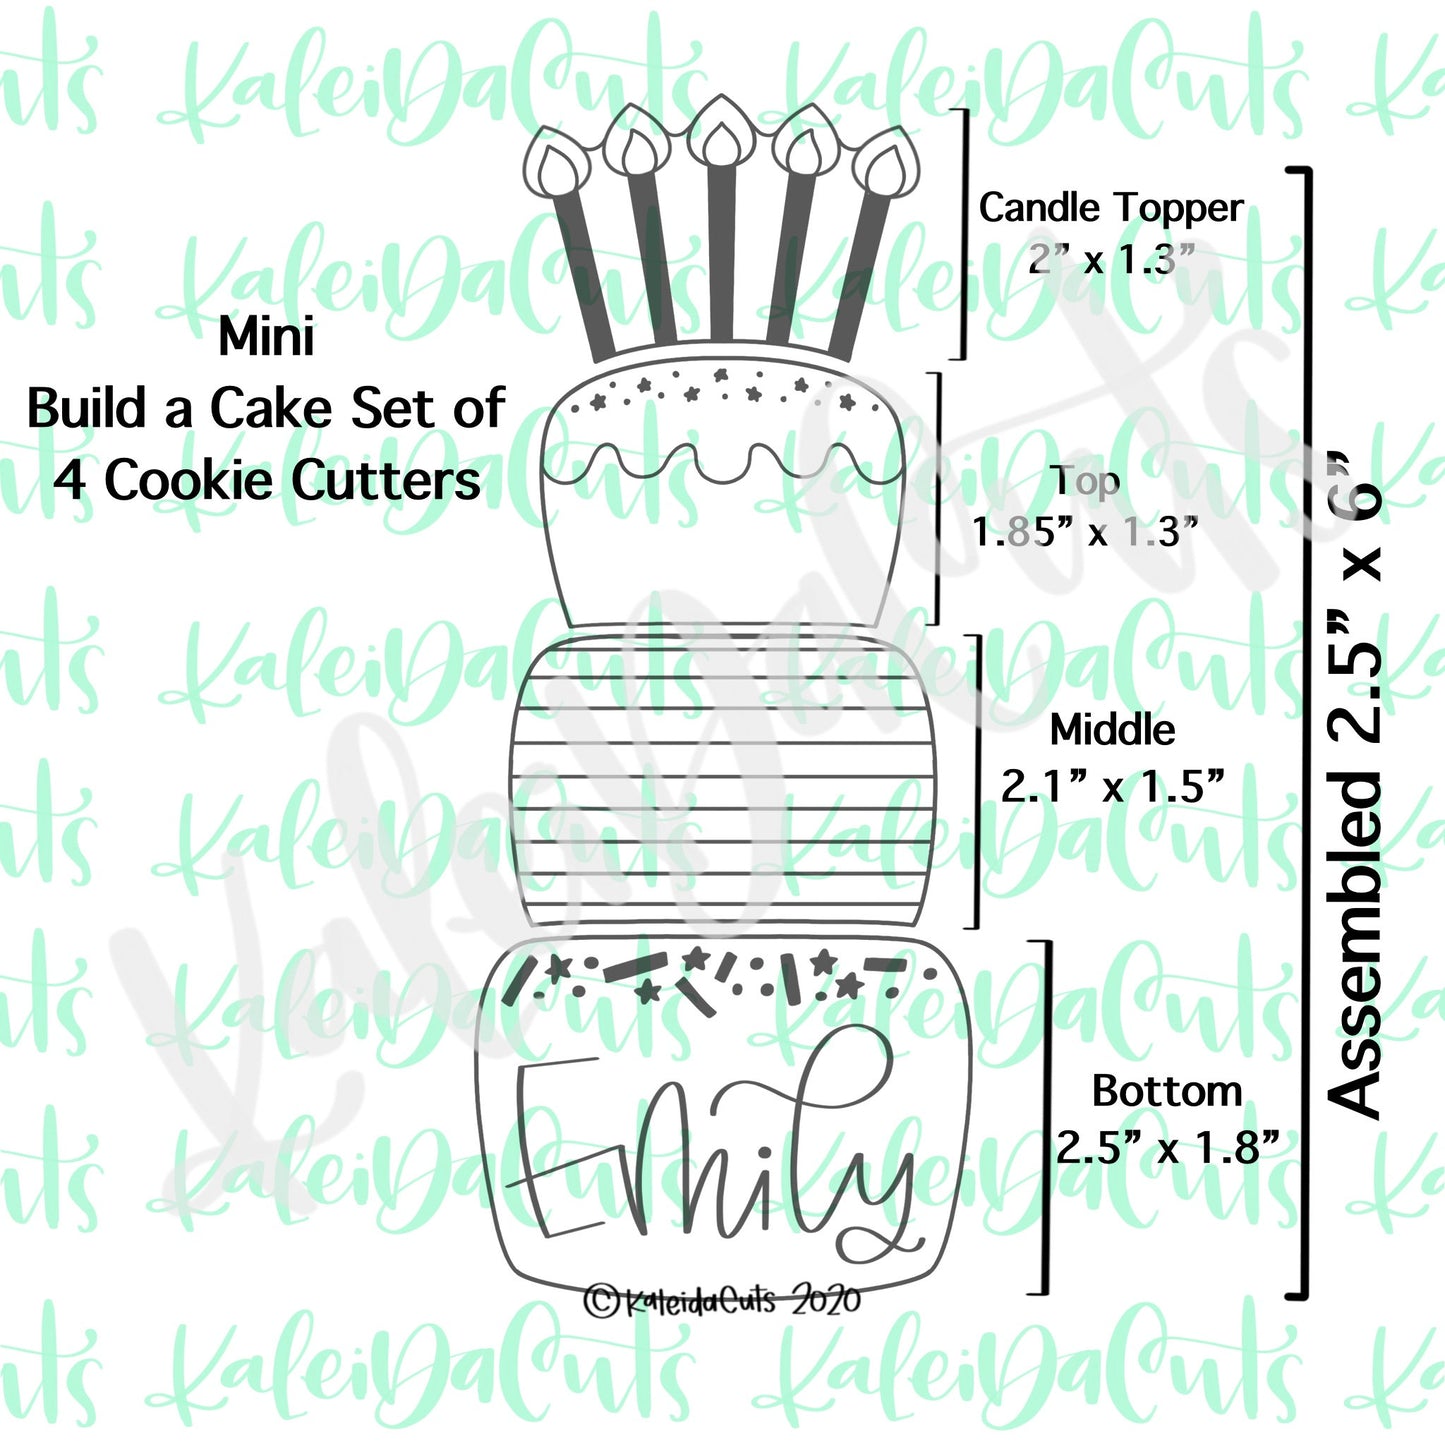 Build a Cake Set of 6 Cookie Cutters